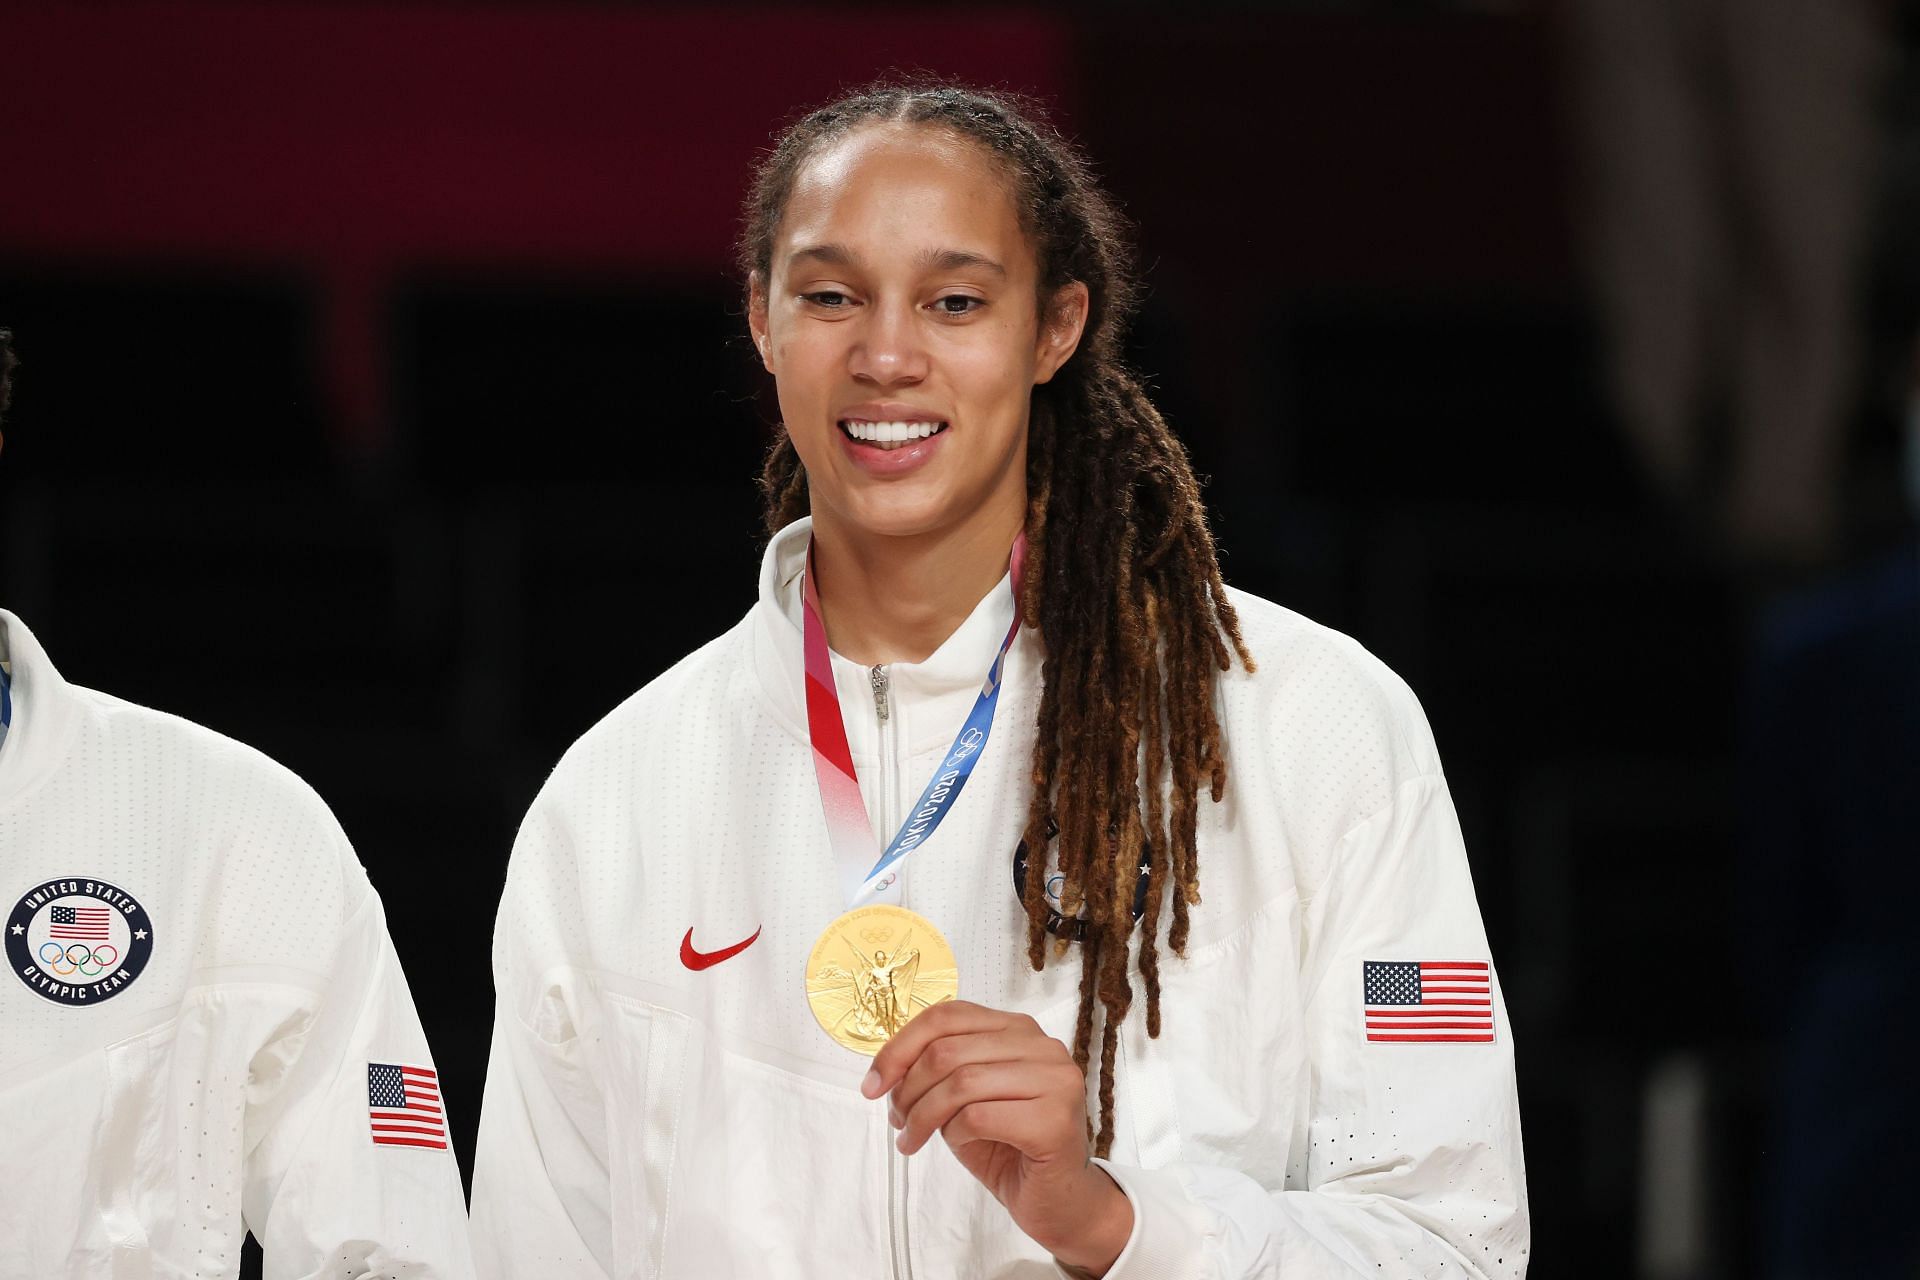 Griner has won many accolades in her impressive professional career (Image via Getty Images)